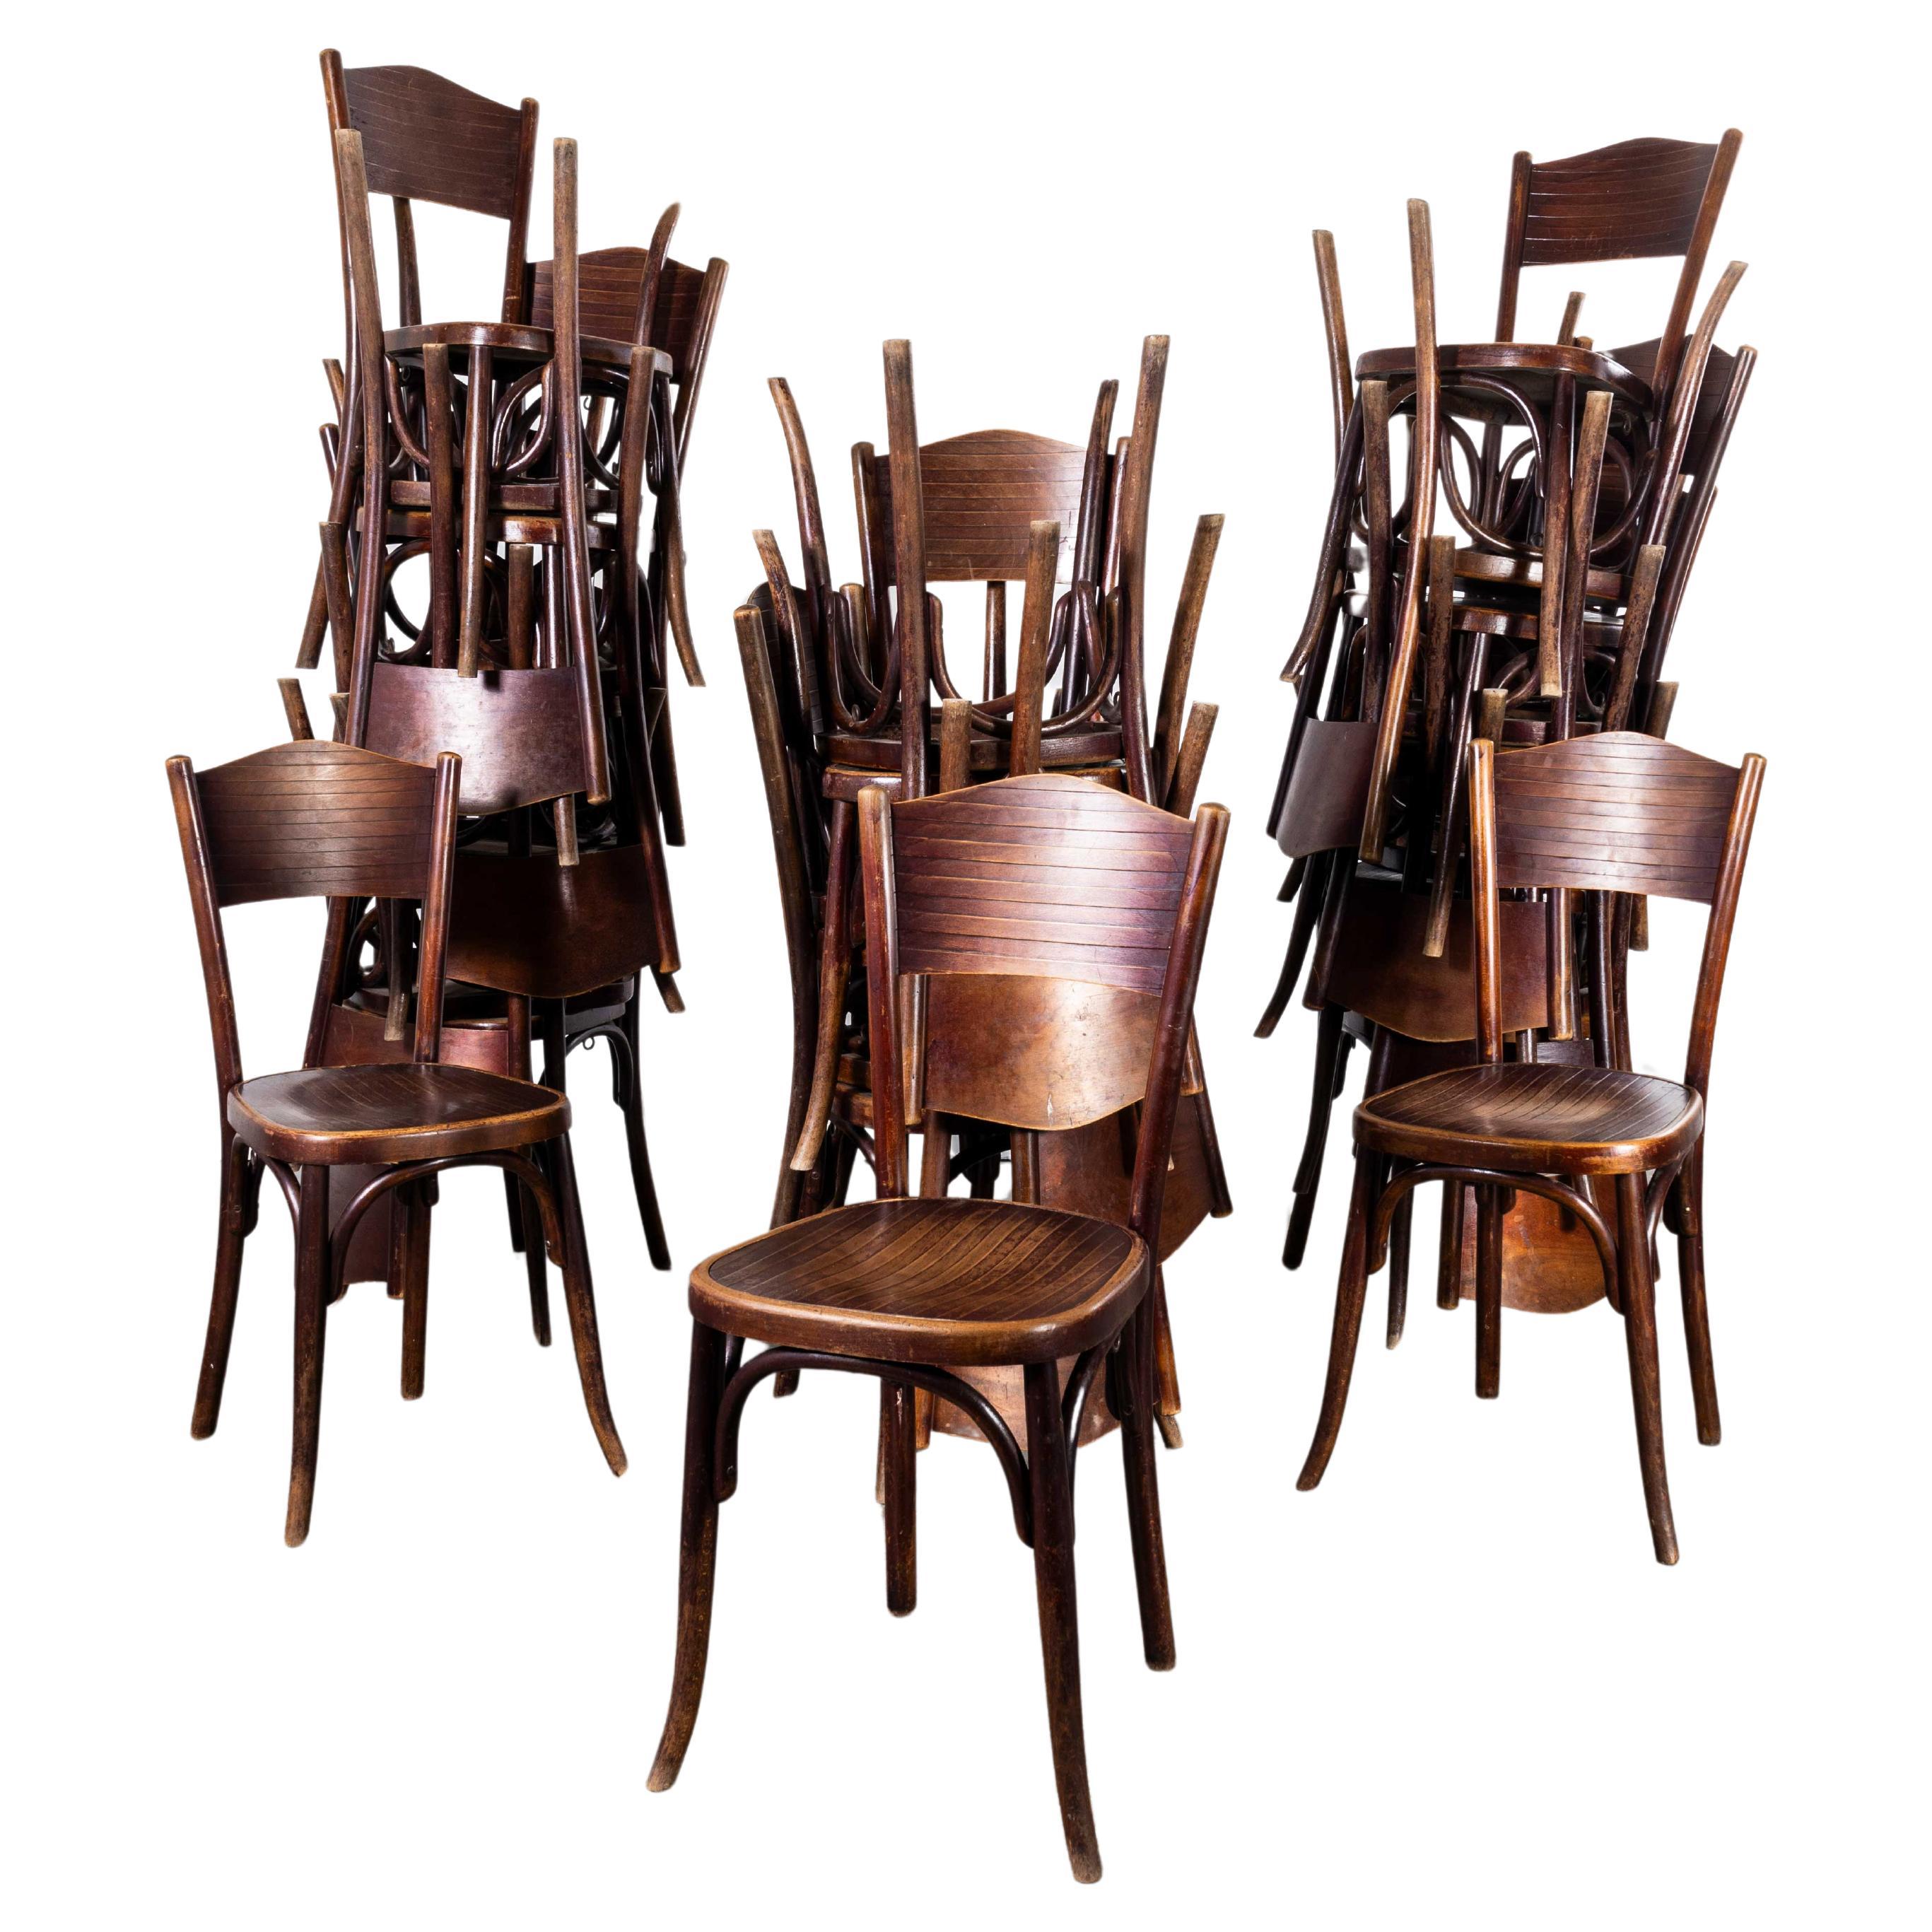 1940's Fischel Stamped Bentwood Dining Chairs - Good Quantity Available